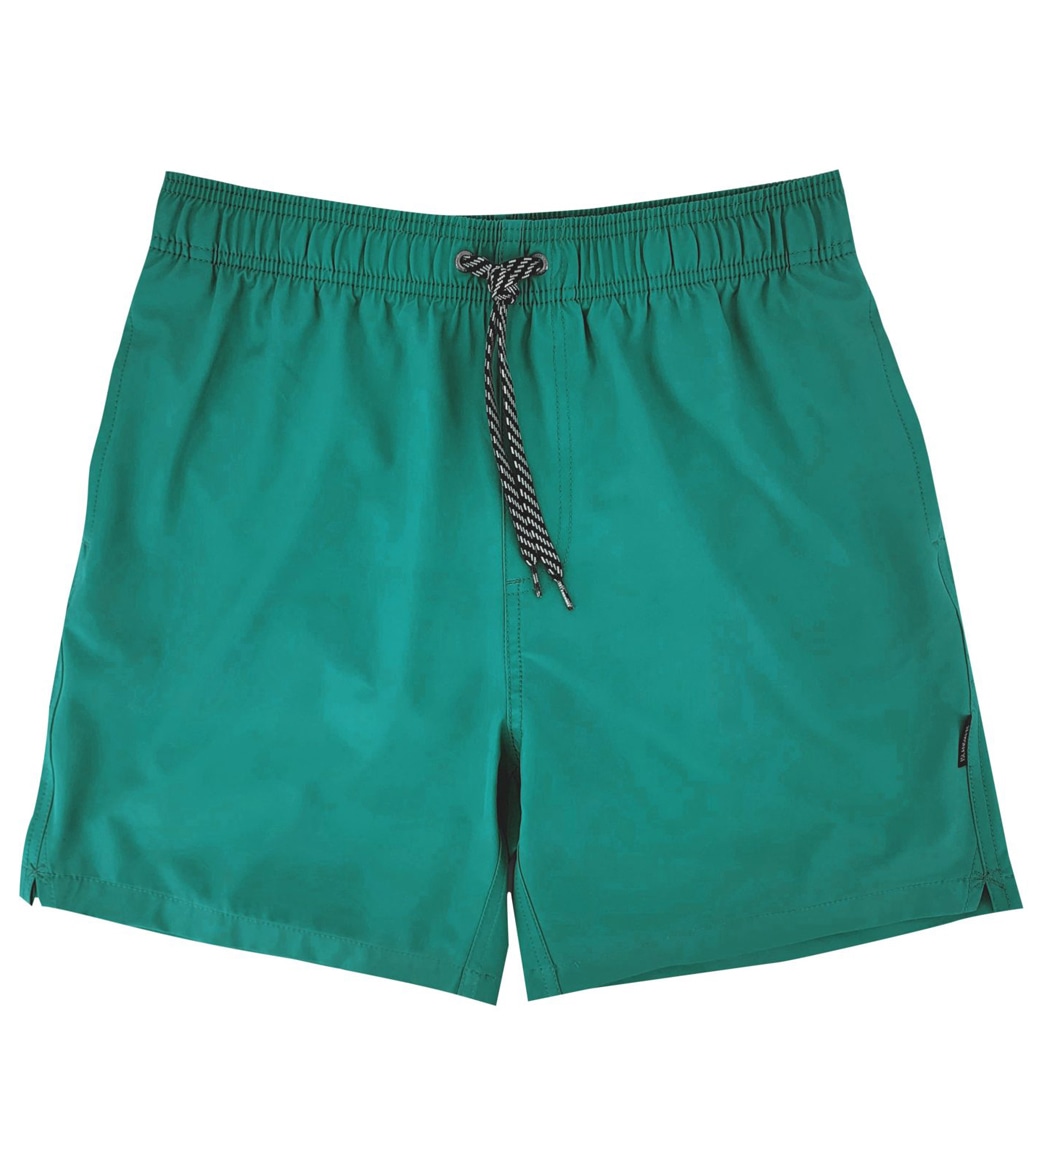 Island Haze Men's 16.5 Barbados Solid Volley Shorts - Green Large Polyester - Swimoutlet.com